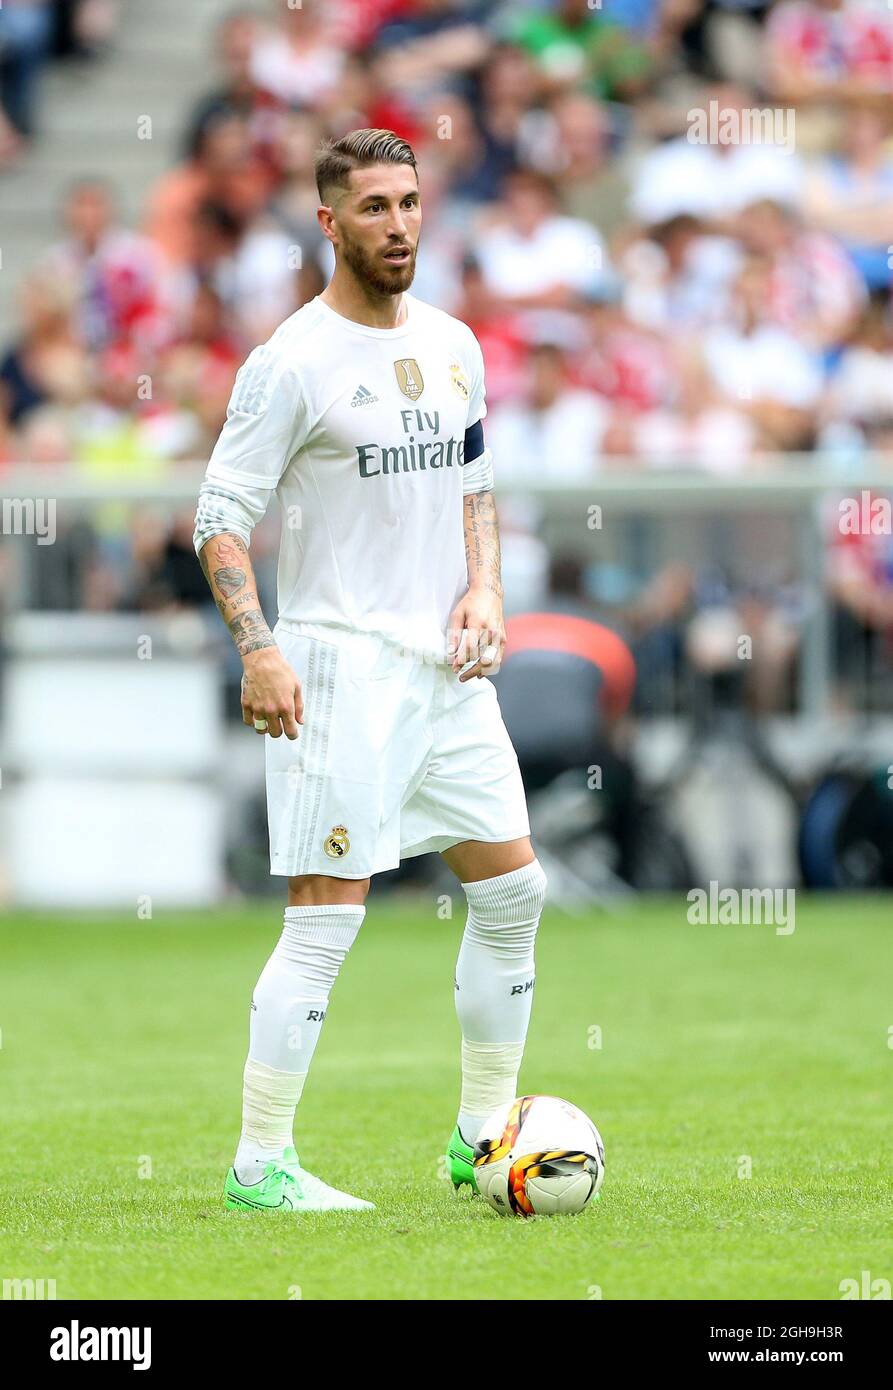 Image #: 38605231 Aug. 4, 2015 - Munich, United Kingdom - Real Madrid's  Sergio Ramos in action..Audi Cup - Real Madrid vs Tottenham Hotspur -  Allianz Arena- Munich -Germany - 4th August 2015 Stock Photo - Alamy